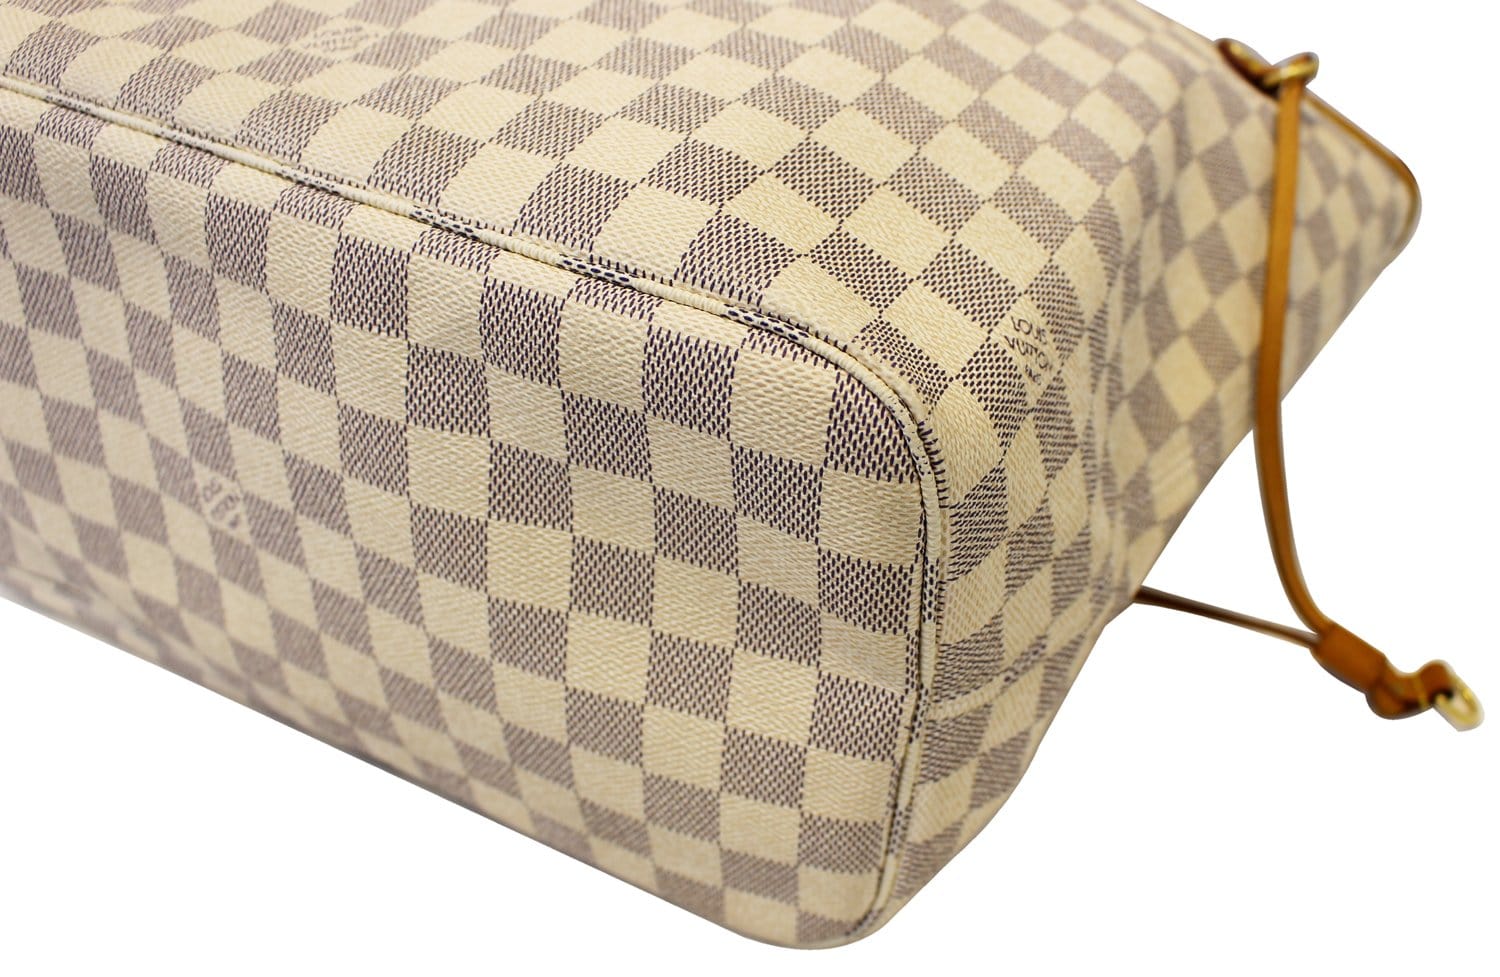 Pre-Owned Louis Vuitton Neverfull Damier Azur MM Tote Bag - Excellent  Condition 